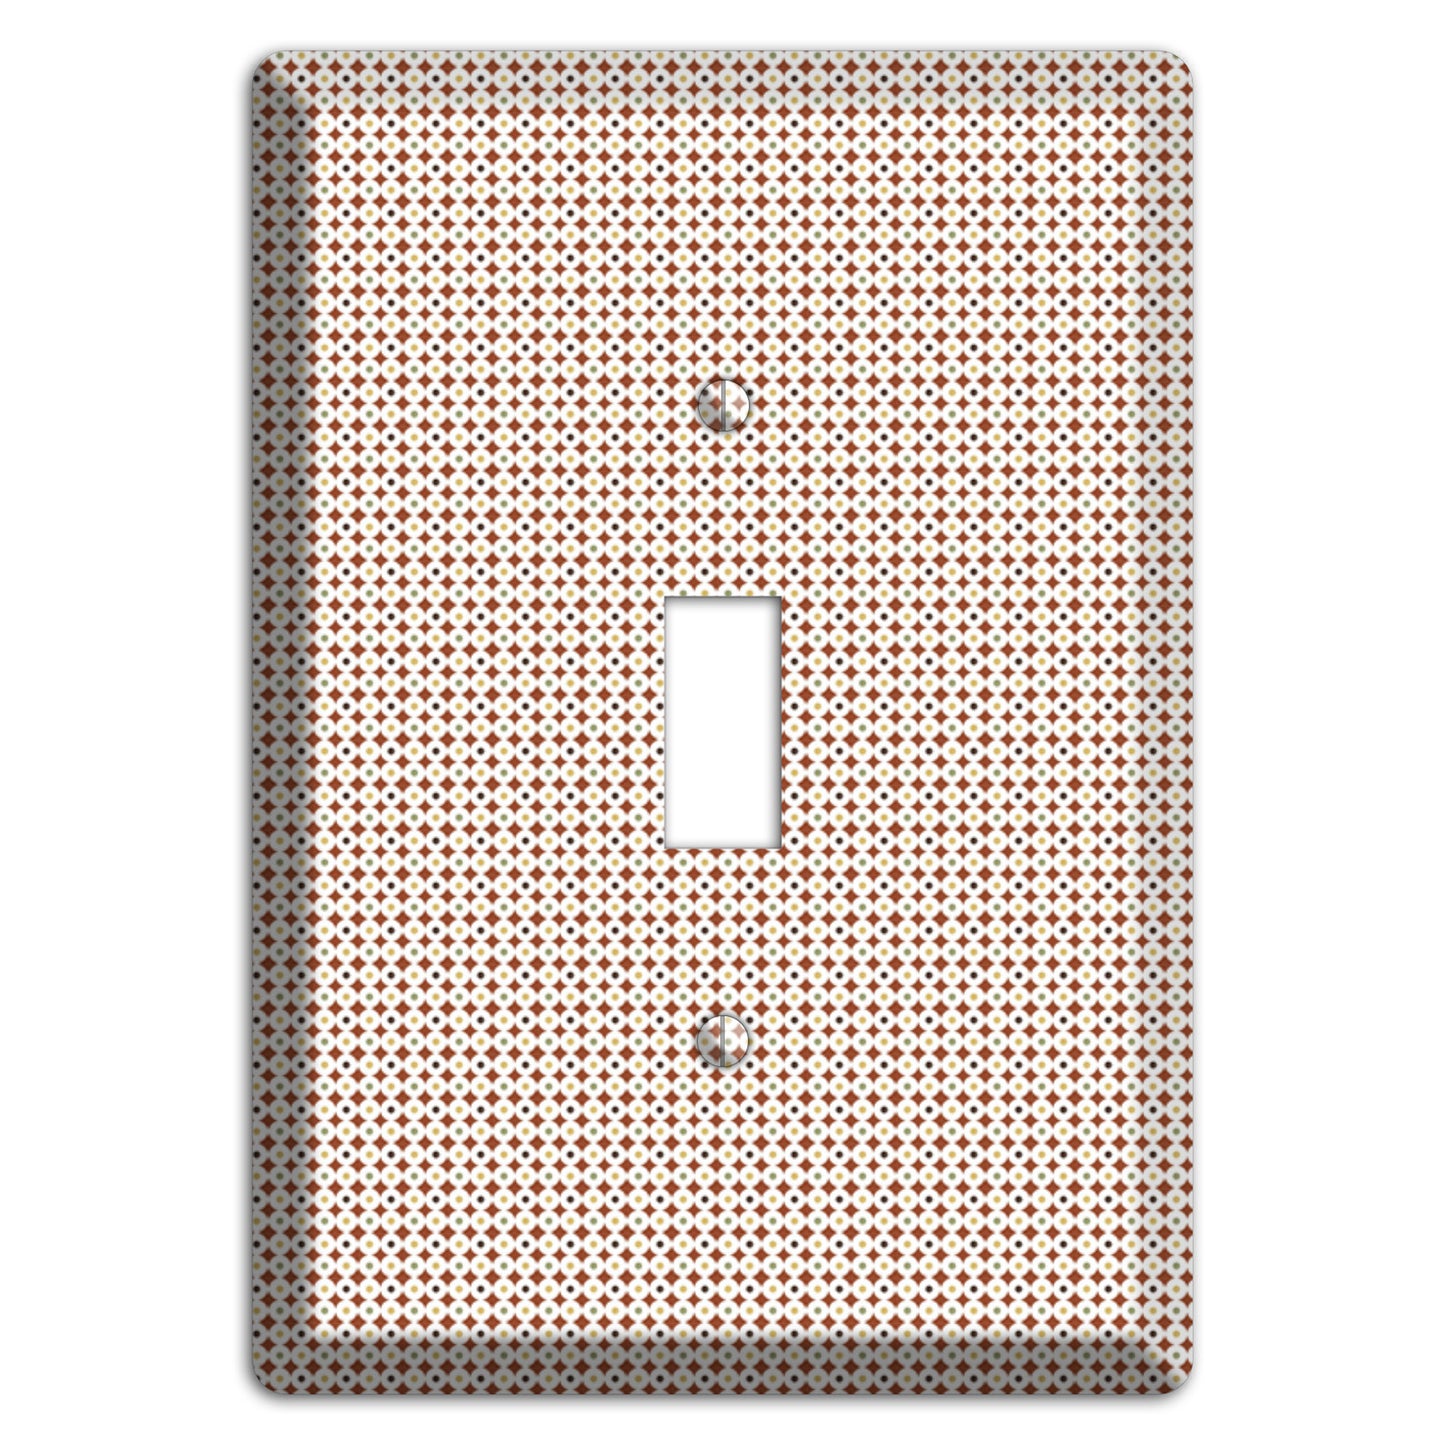 Beige Weave Cover Plates